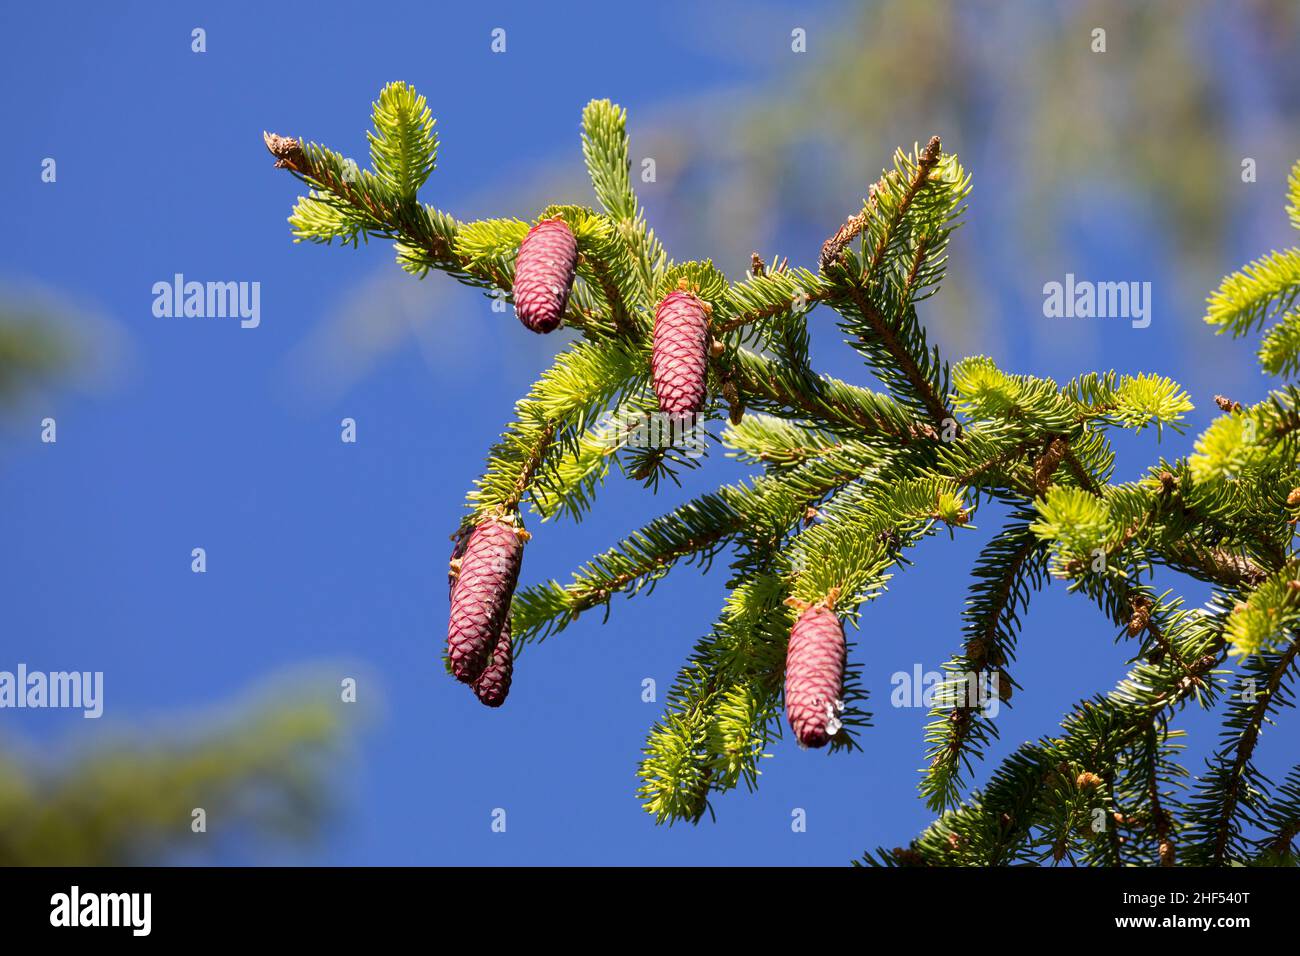 Fichte, Zapfen, Fichtenzapfen, Fichten-Zapfen, Fichten, Gewöhnliche Fichte, Rot-Fichte, Rotfichte, Picea abies, Spruce, Common Spruce, Norway spruce, Stock Photo